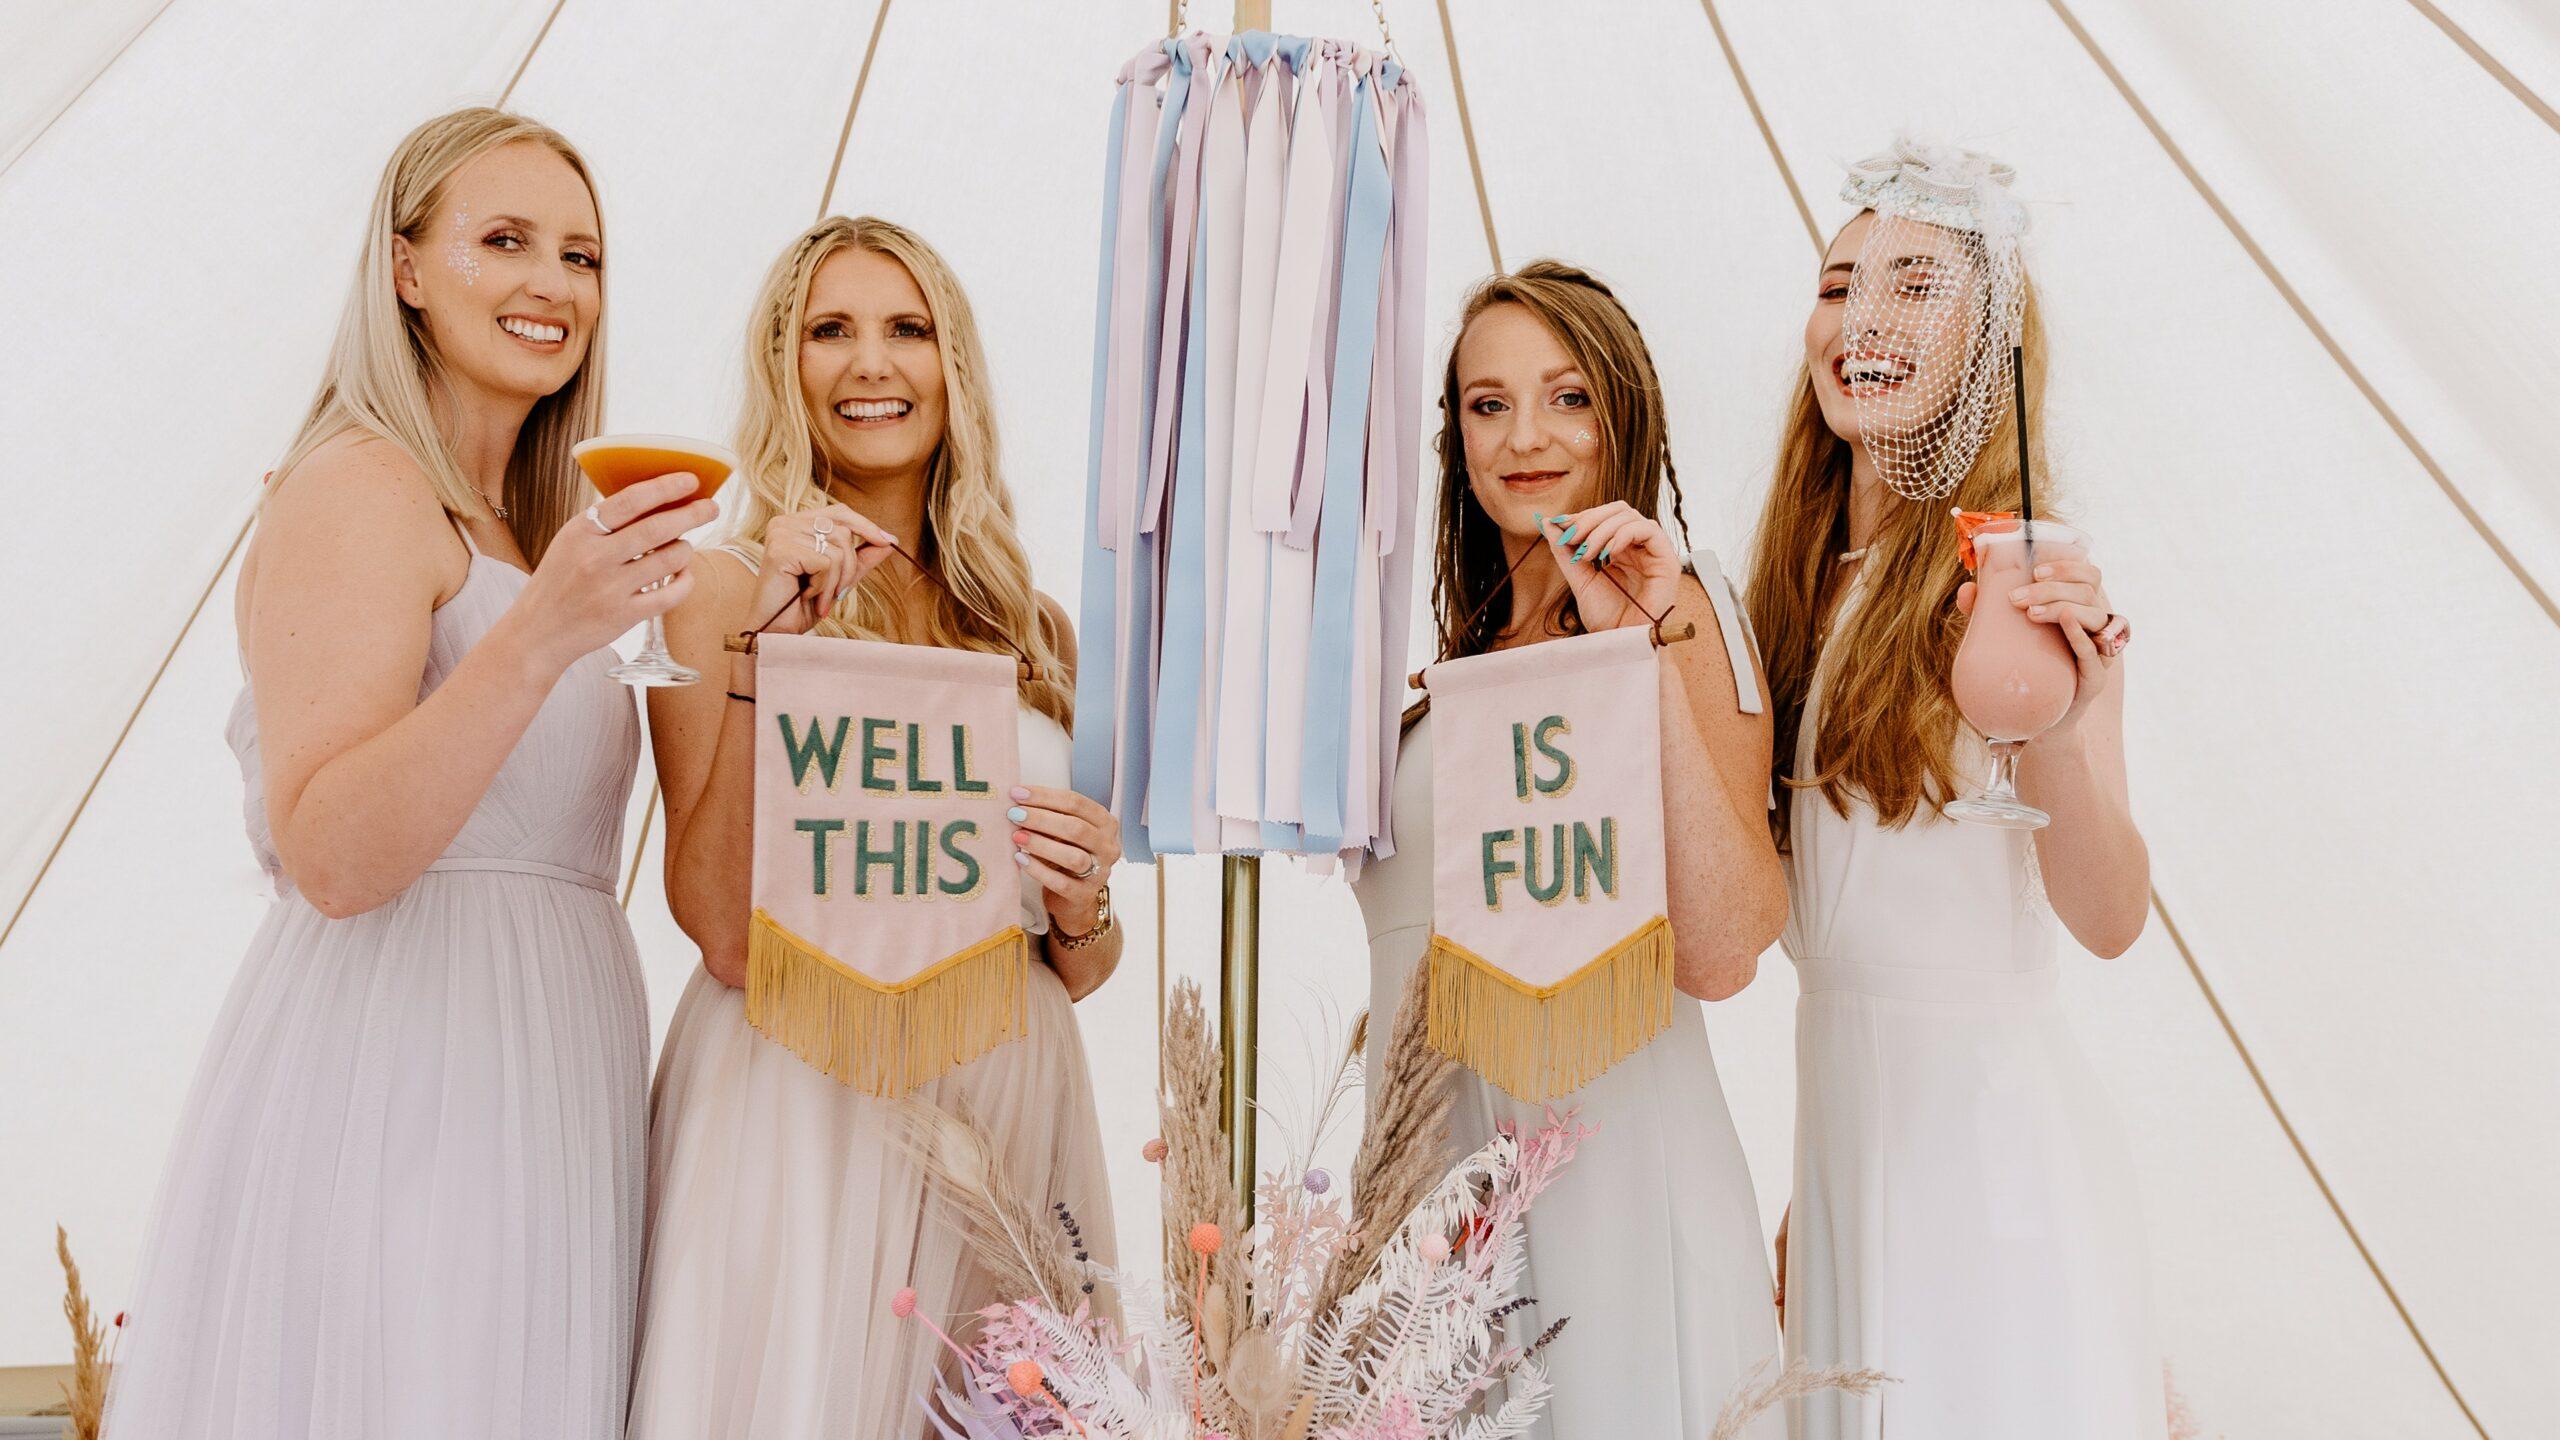 Image shows a Bride and her Bridesmaids on a wedding day.